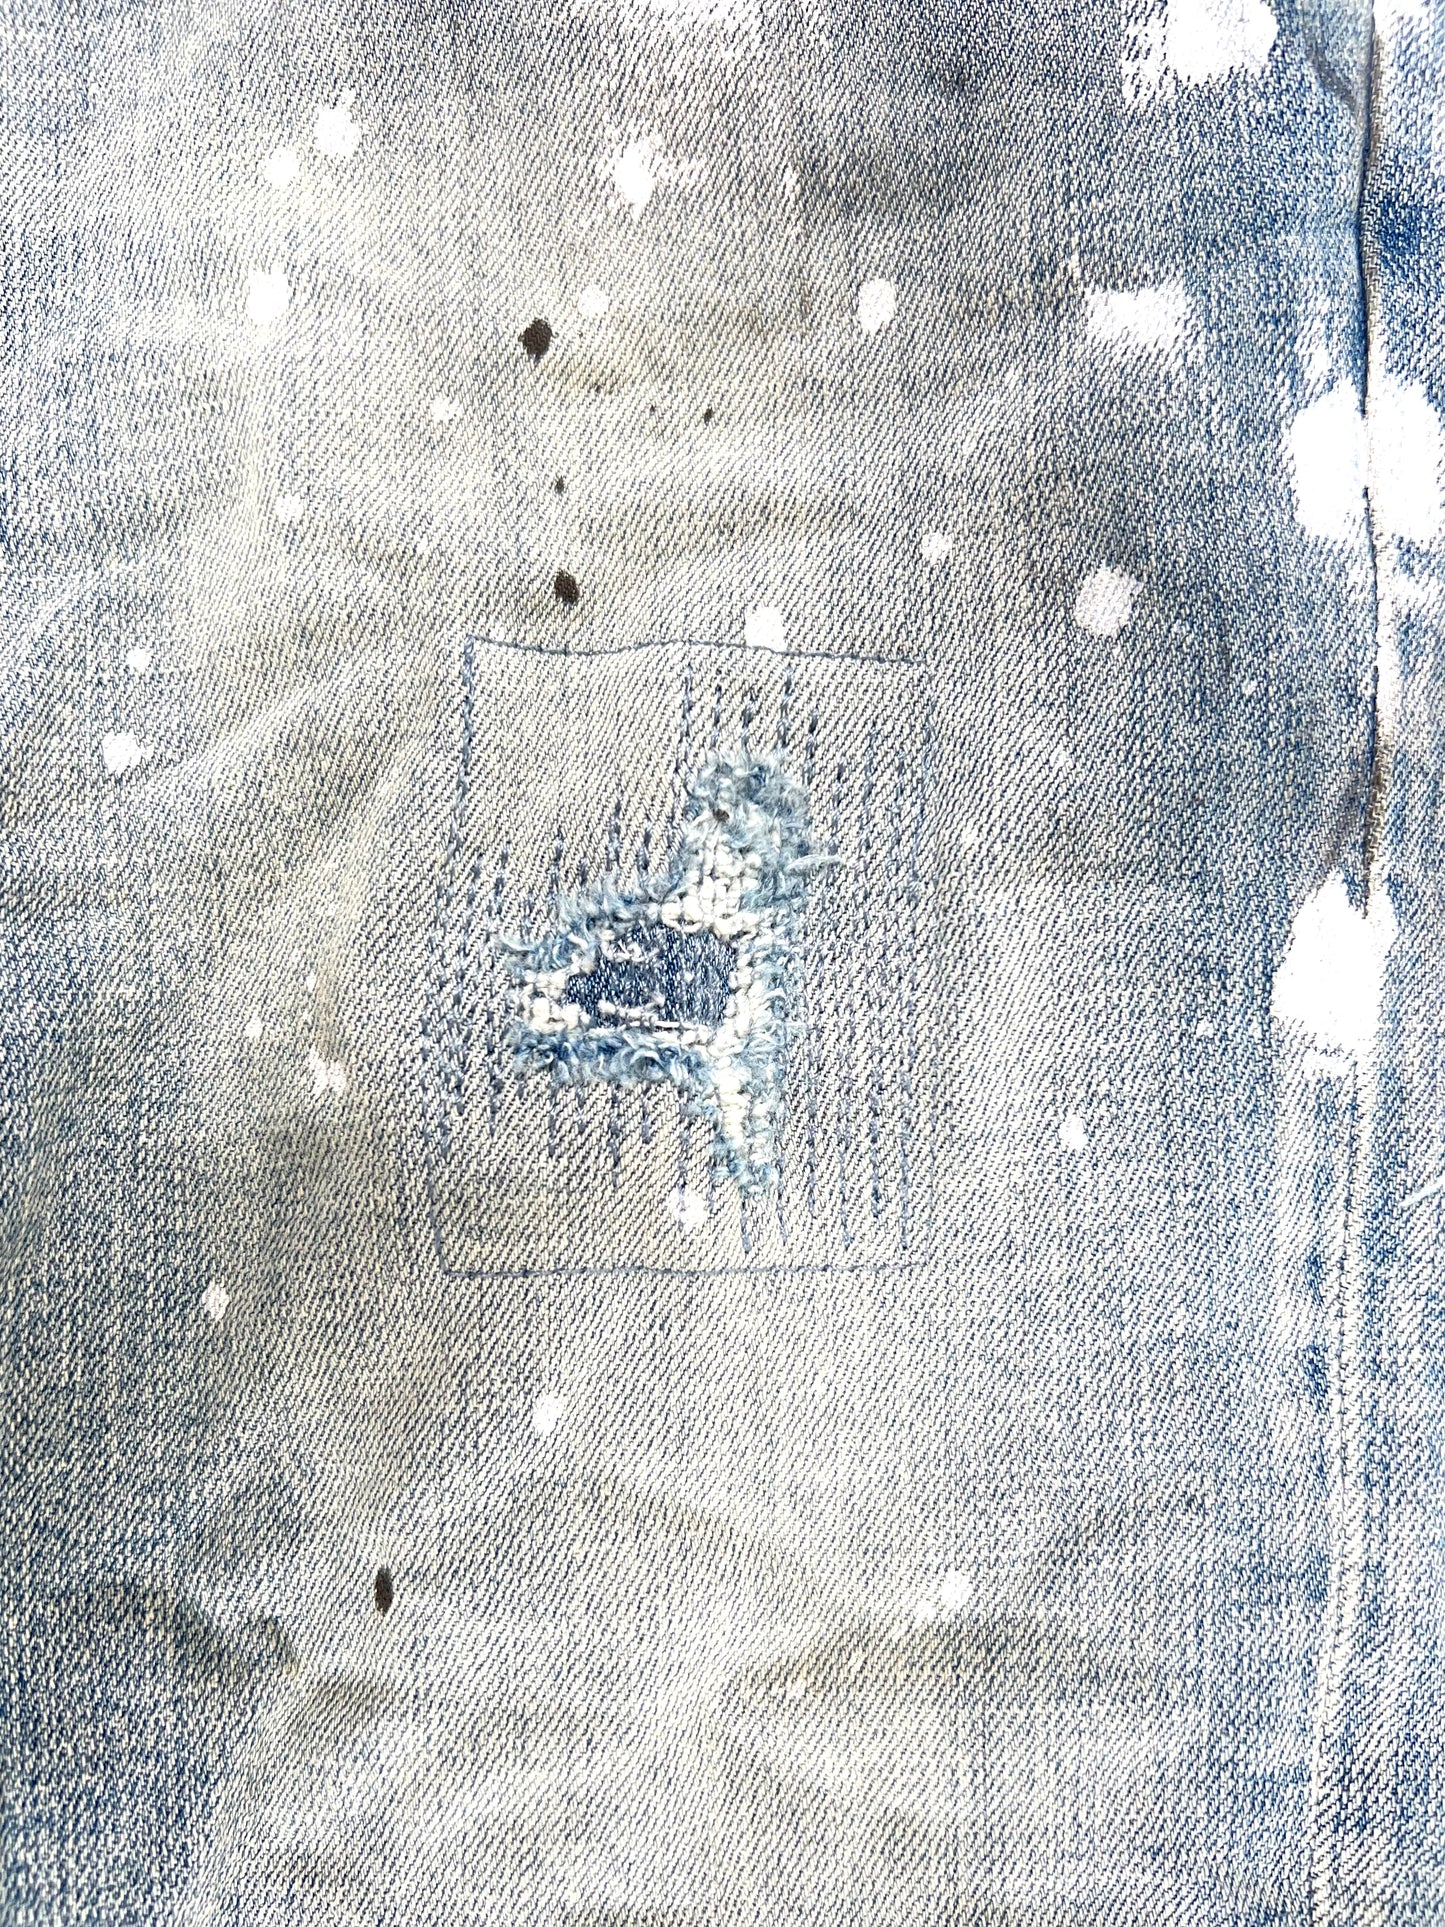 A close-up of a ripped denim jacket with paint on it. 
Product Name: PURPLE BRAND JEANS P001-LIA LIGHT INDIGO PAINT BLOWOUT 
Brand Name: PURPLE BRAND